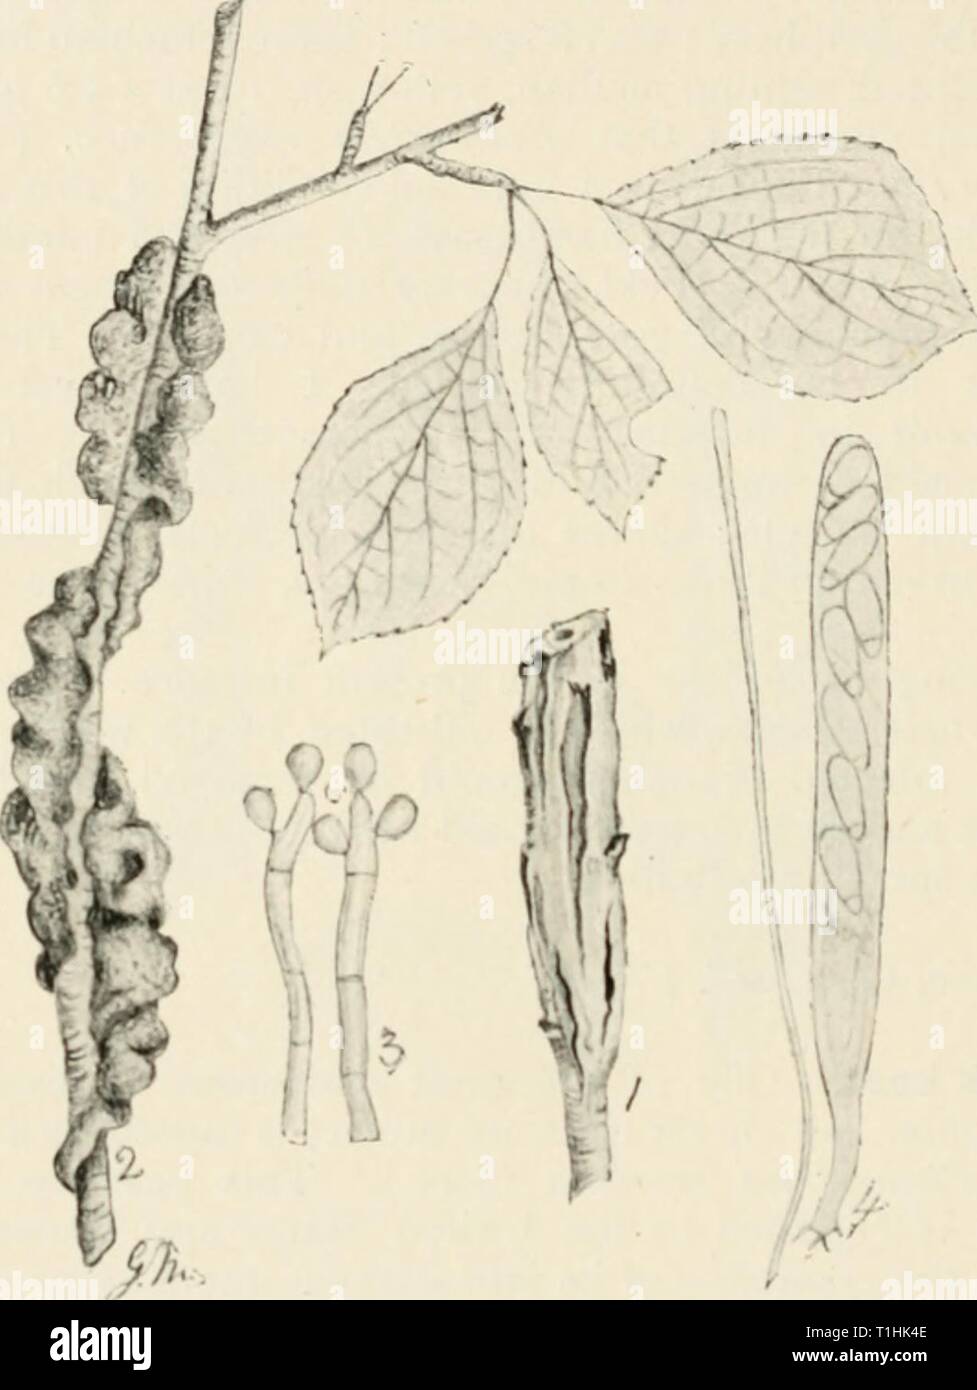 Diseases of cultivated plants and Diseases of cultivated plants and trees  diseasesofcultiv00massuoft Year: [1910?]  214 DISEASES OF CULTIVATED PLANTS conidia elliptical, olive, about i6 /x long. Pycnidia resembling the perithecia, containing elliptical pale yellow, 3-septate stylospores, 10-12x6-7 /x. Spermogonia also similar to the perithecia, producing very minute spermatia. Perithecia crowded, asci cvlindric-ovate, 110-150x16-18 fx; spores    Fig. 61.—Plowrightia mcrhosa. i, portion of a plum branch, showing conidial stage of the fungus; 2, branch with ascigerous condition of the fungus ;  Stock Photo